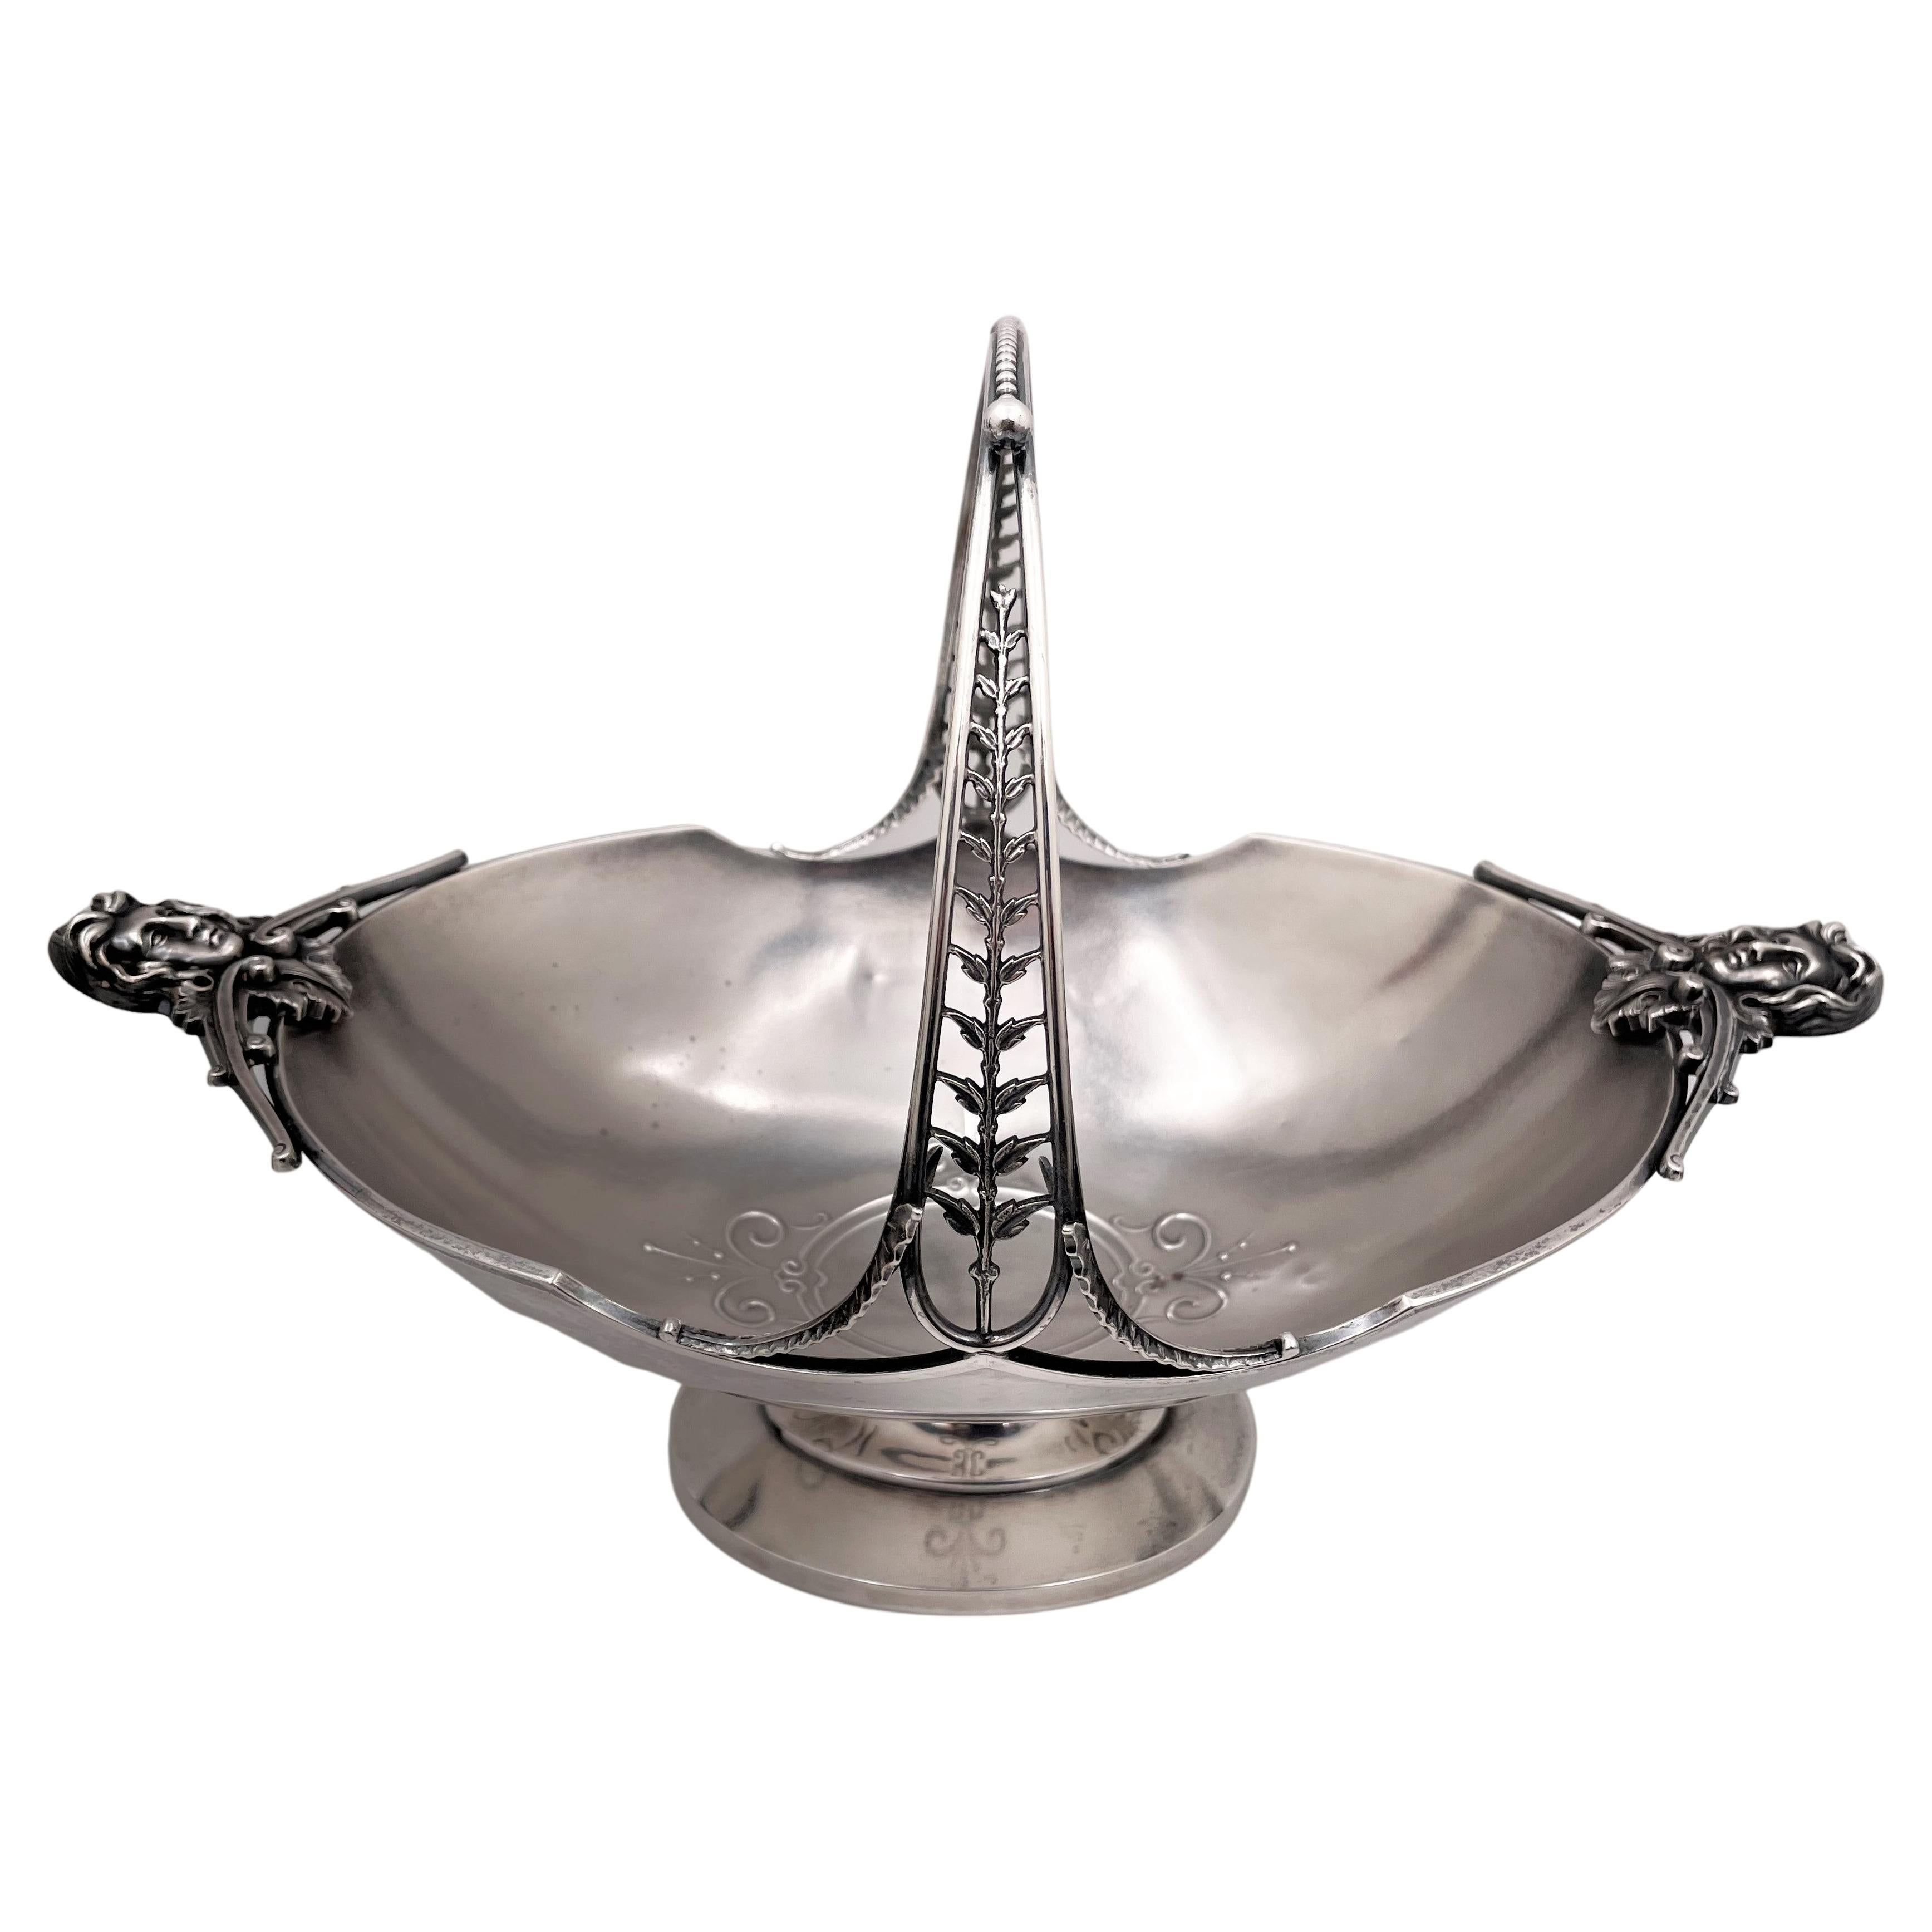 Wood & Hughes Sterling Silver 19th Century Bowl/Basket in Neoclassical Style For Sale